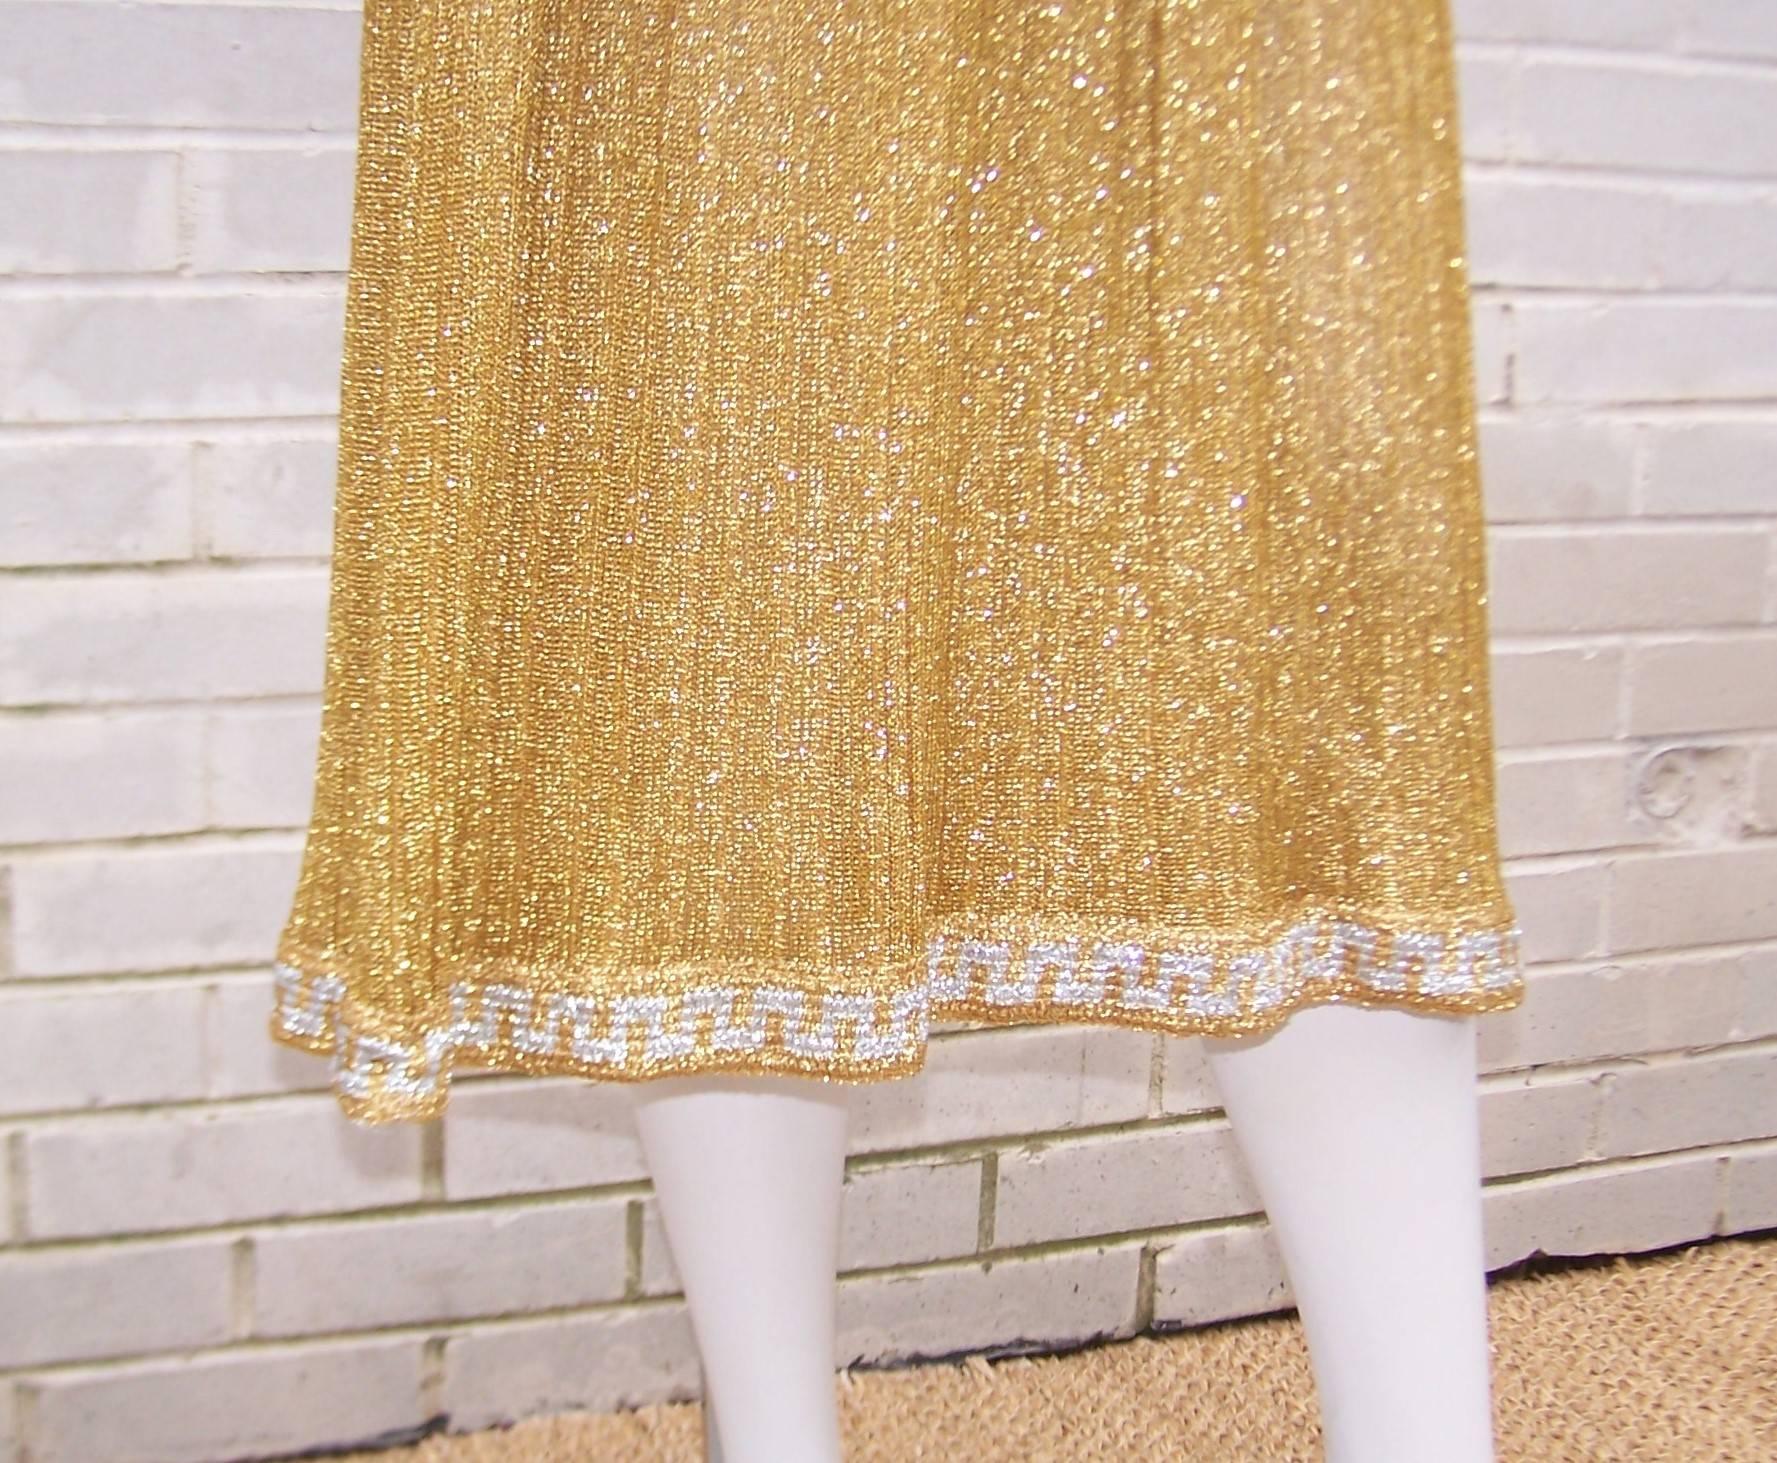 Brown Dazzling 1960's Mr. Mort by Stan Herman Gold & Silver Lamé Dress